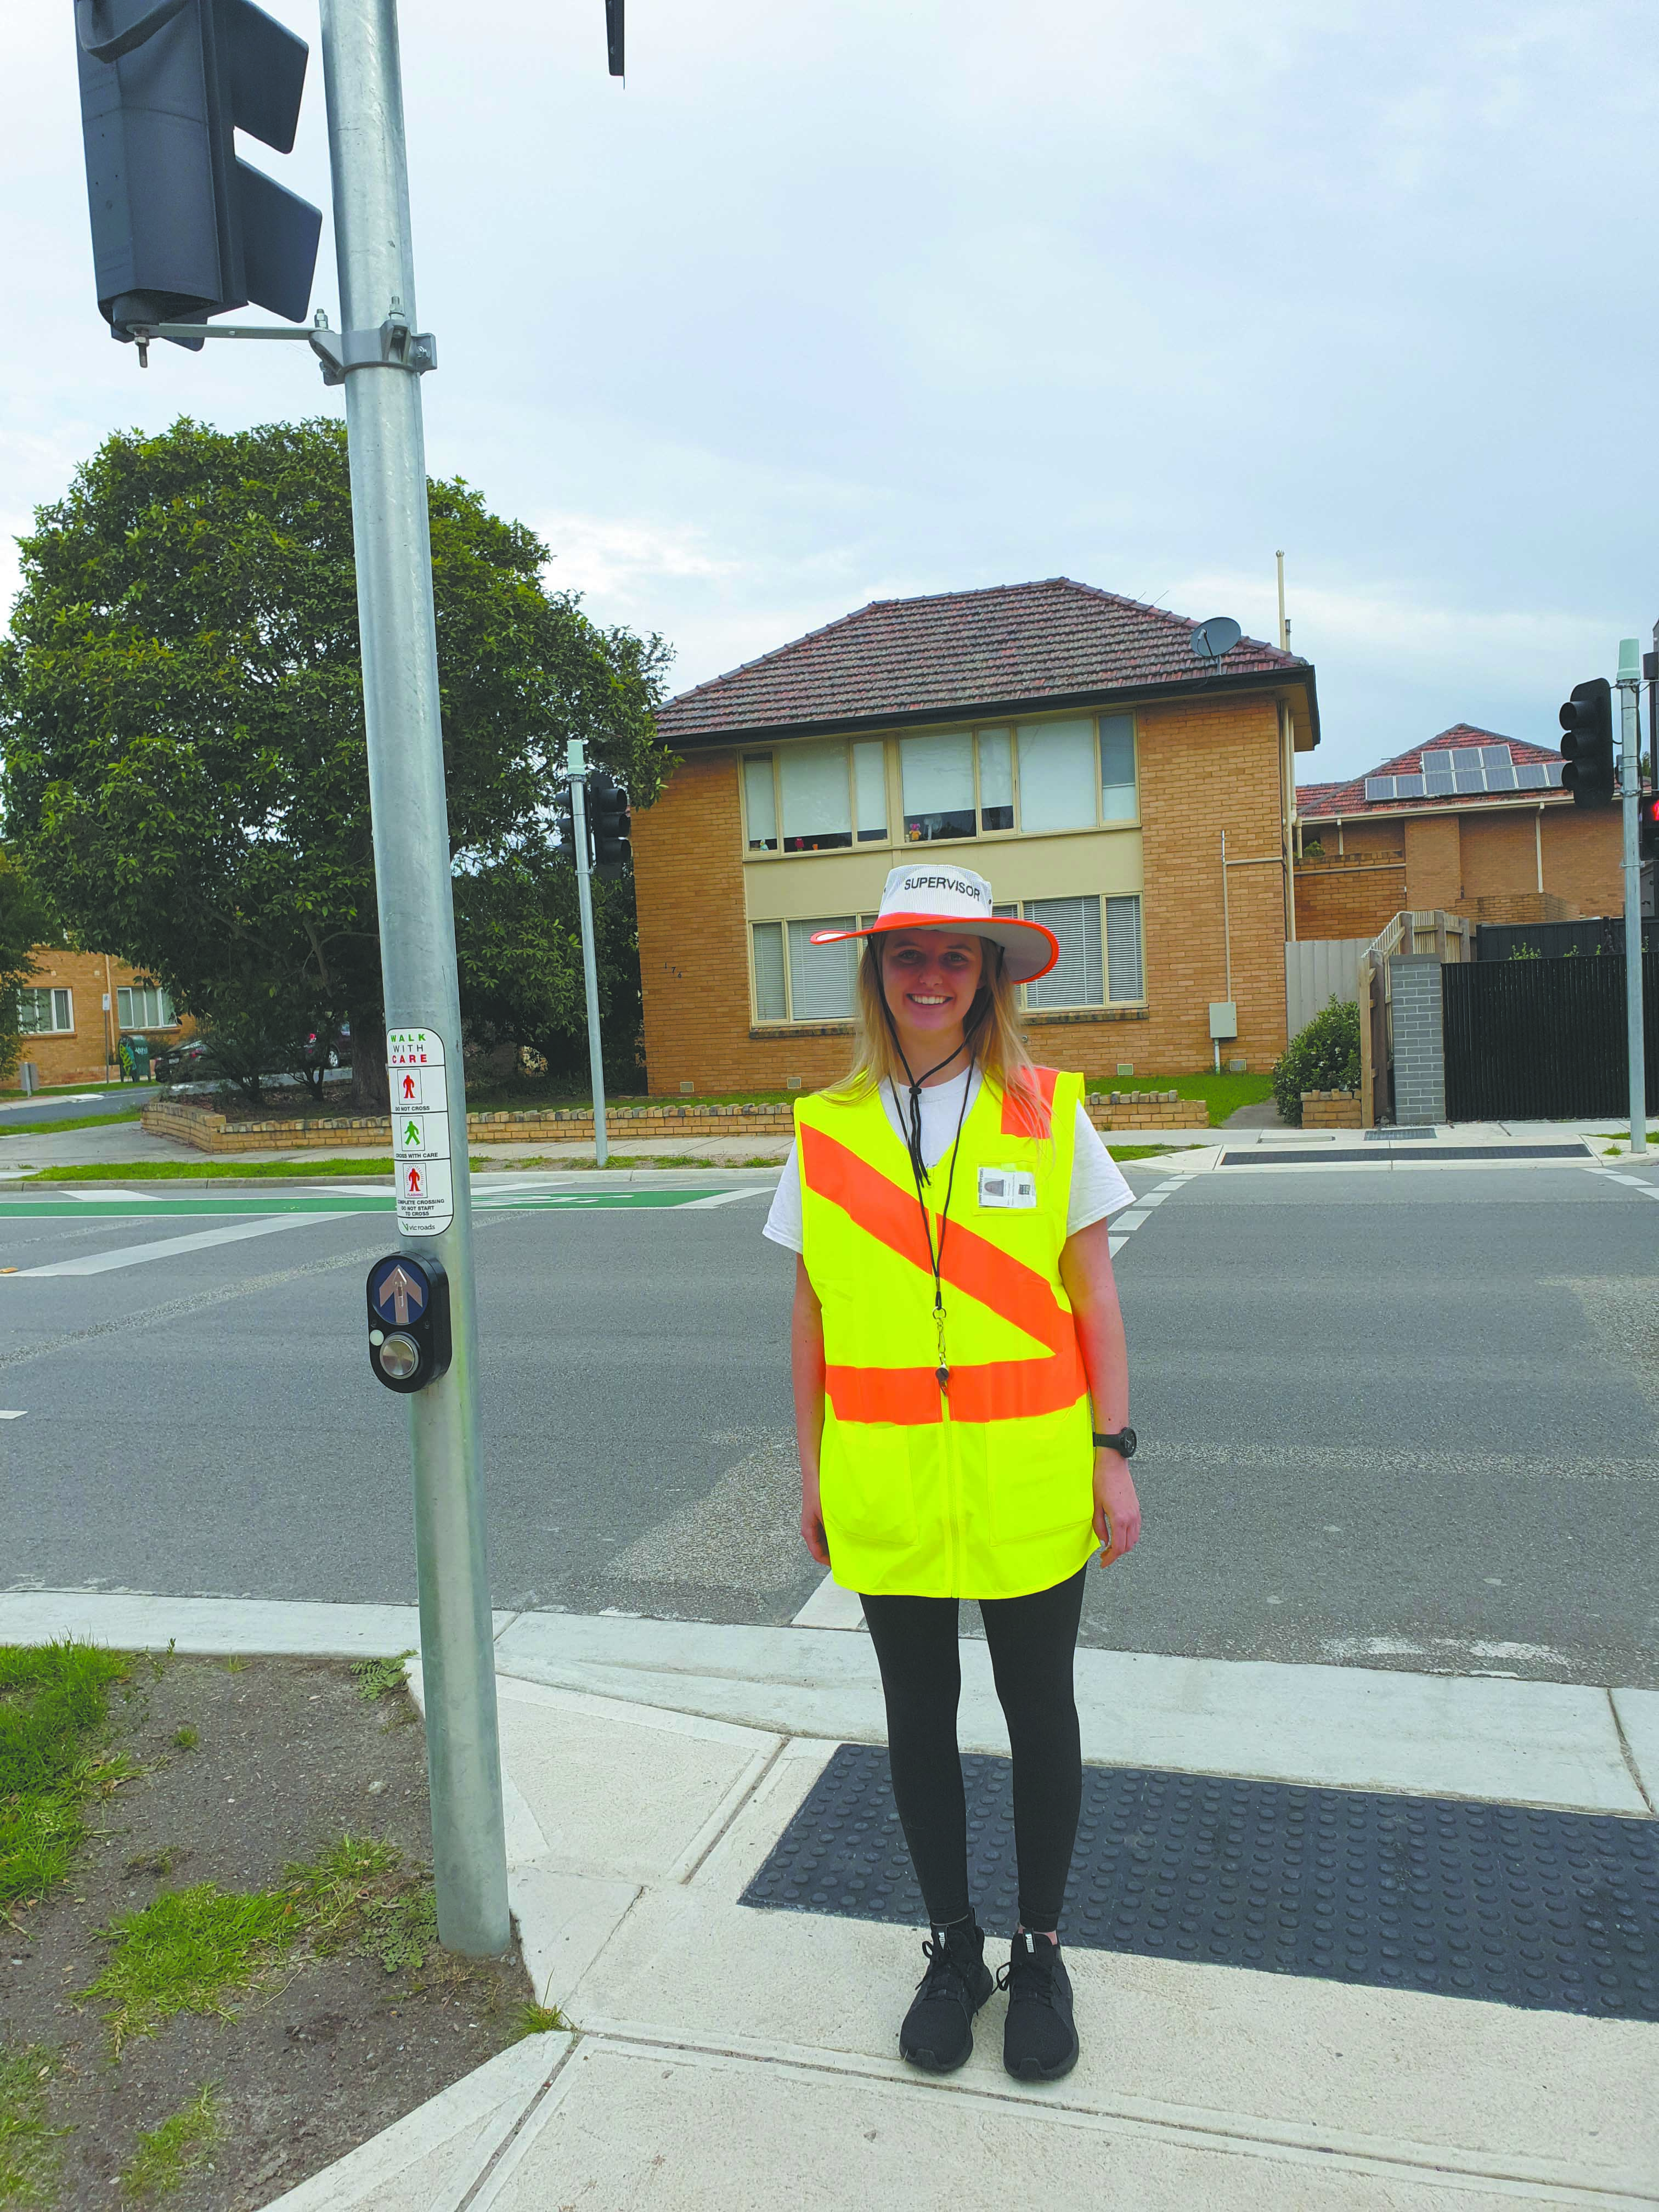 Chelsie is one of 14 lifeguards from Glen Eira Sports and Aquatic Centre working as a school crossing supervisor.